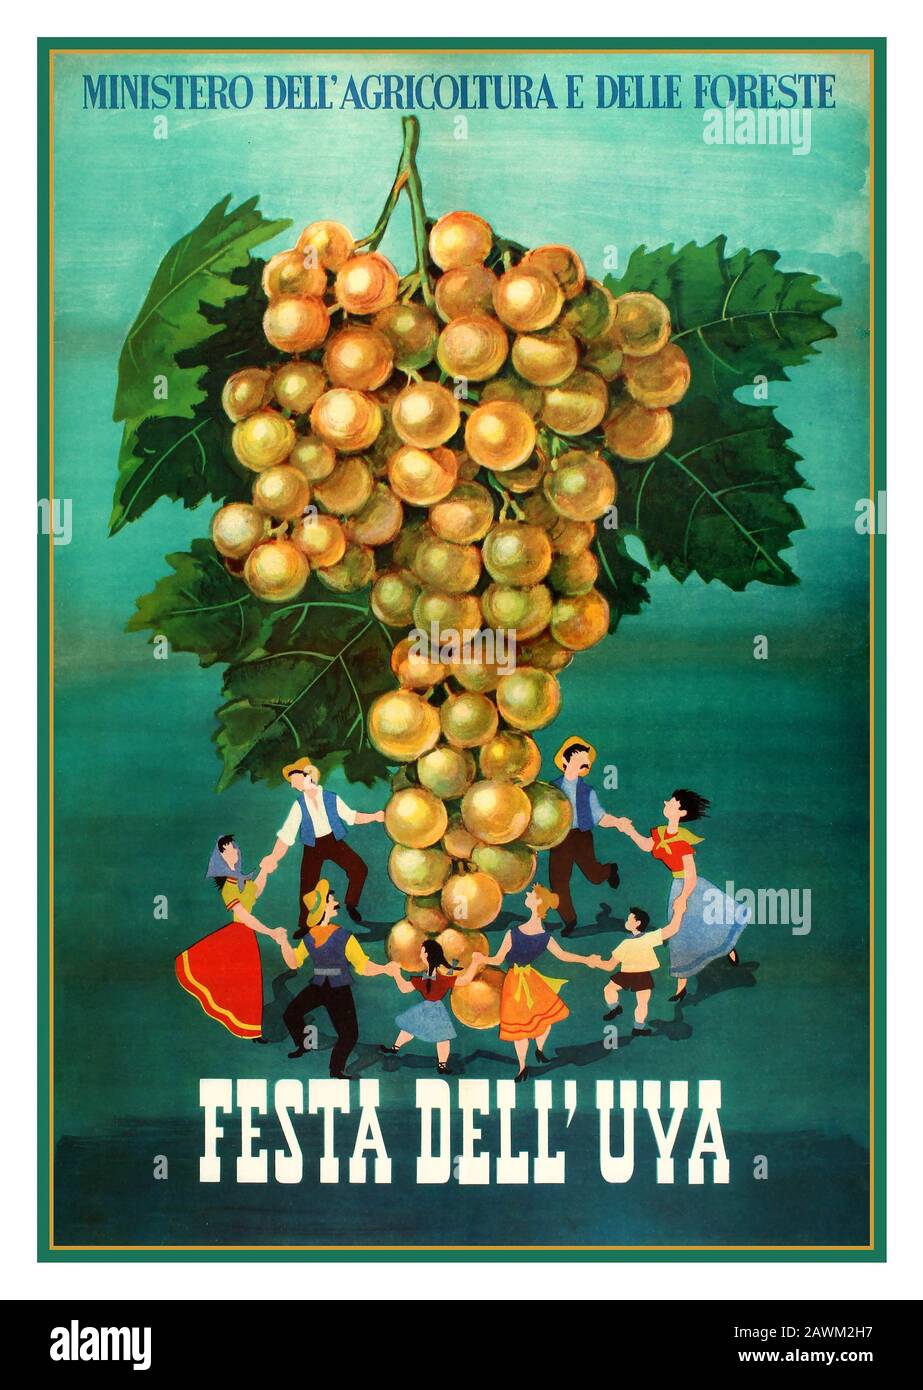 Vintage wine festival advertising poster in Italian for the Festa dell'Uva grape and wine festival published by the Ministero dell'Agricoltura e della Foreste - Ministry of Agriculture and Forest. Adults and children wearing traditional clothes and hats, holding hands and dancing around a giant bunch of white grapes. Printed by Gros Monti & C., Torino.  Italy, 1952, designer: Crea Stock Photo